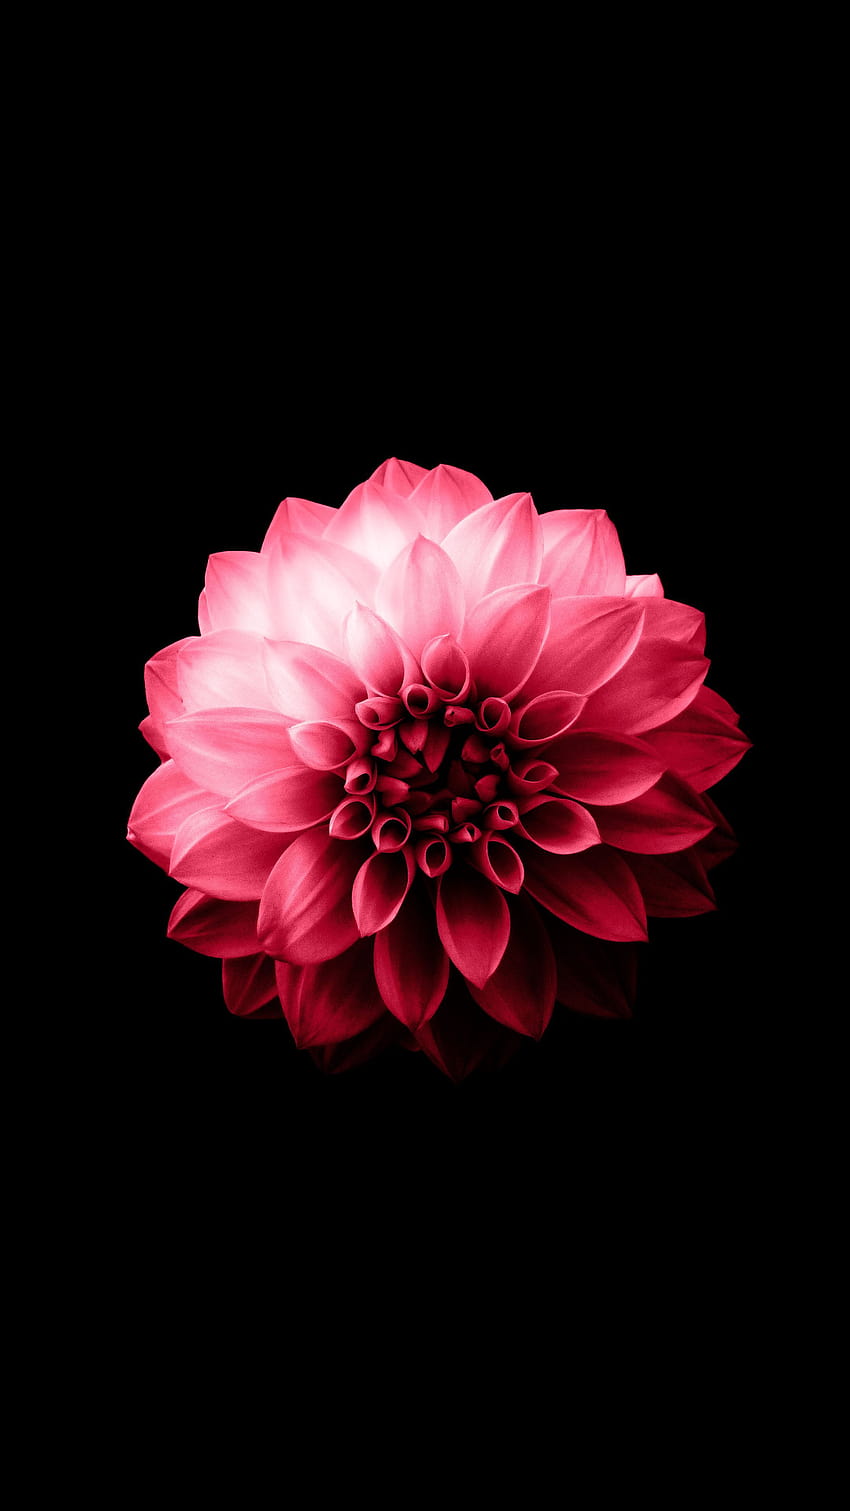 Amoled Flower / Flower Amoled Cave / Every day new and just beautiful for your flowers completely . ~ Gwyncfc, amoled red HD phone wallpaper